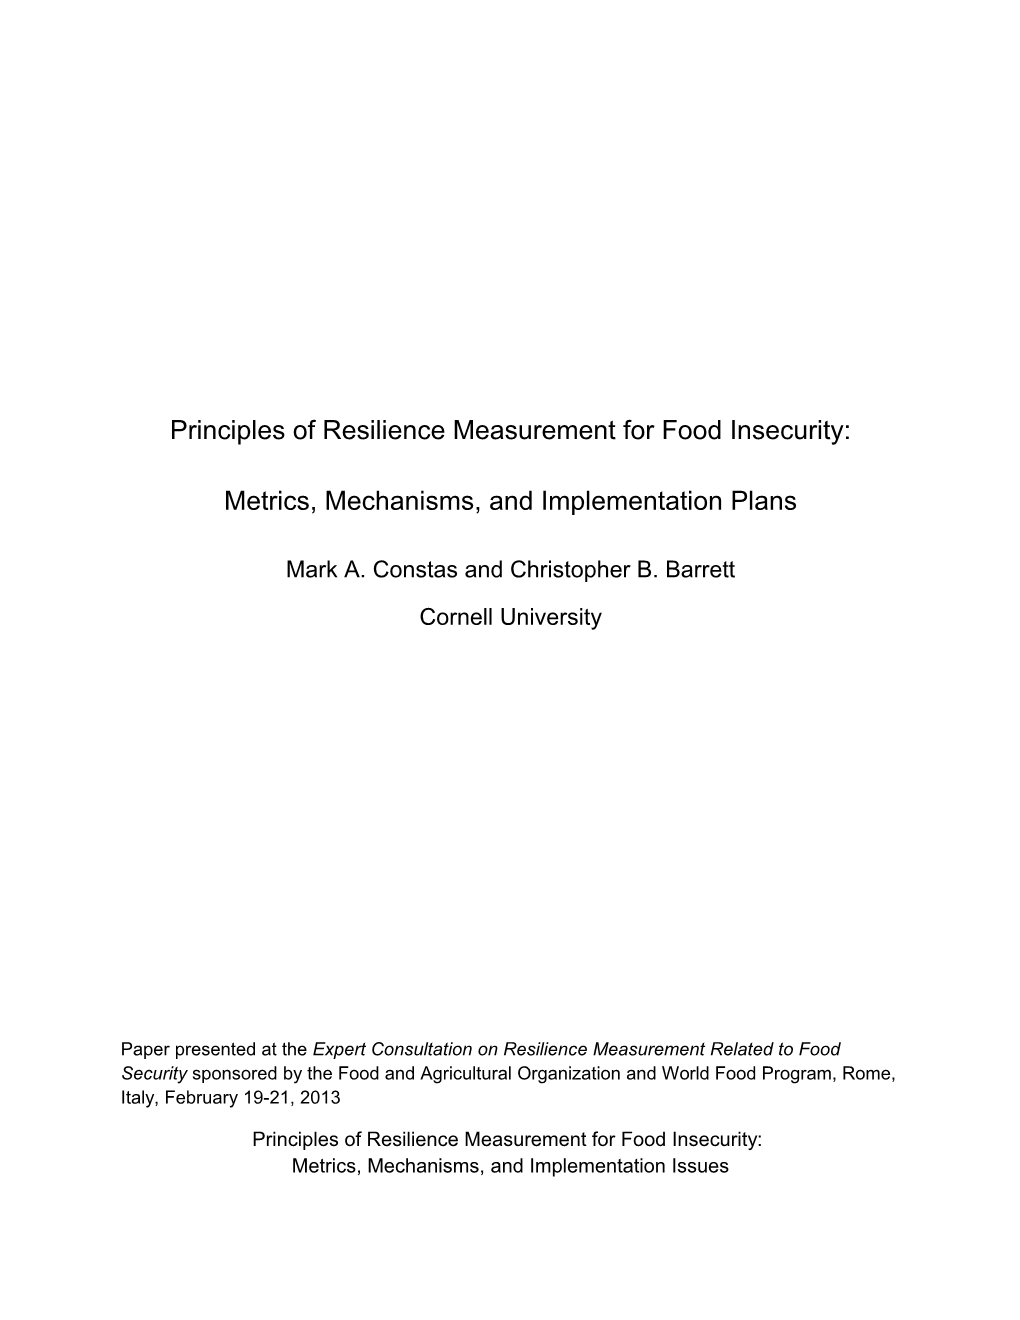 Principles of Resilience Measurement for Food Insecurity